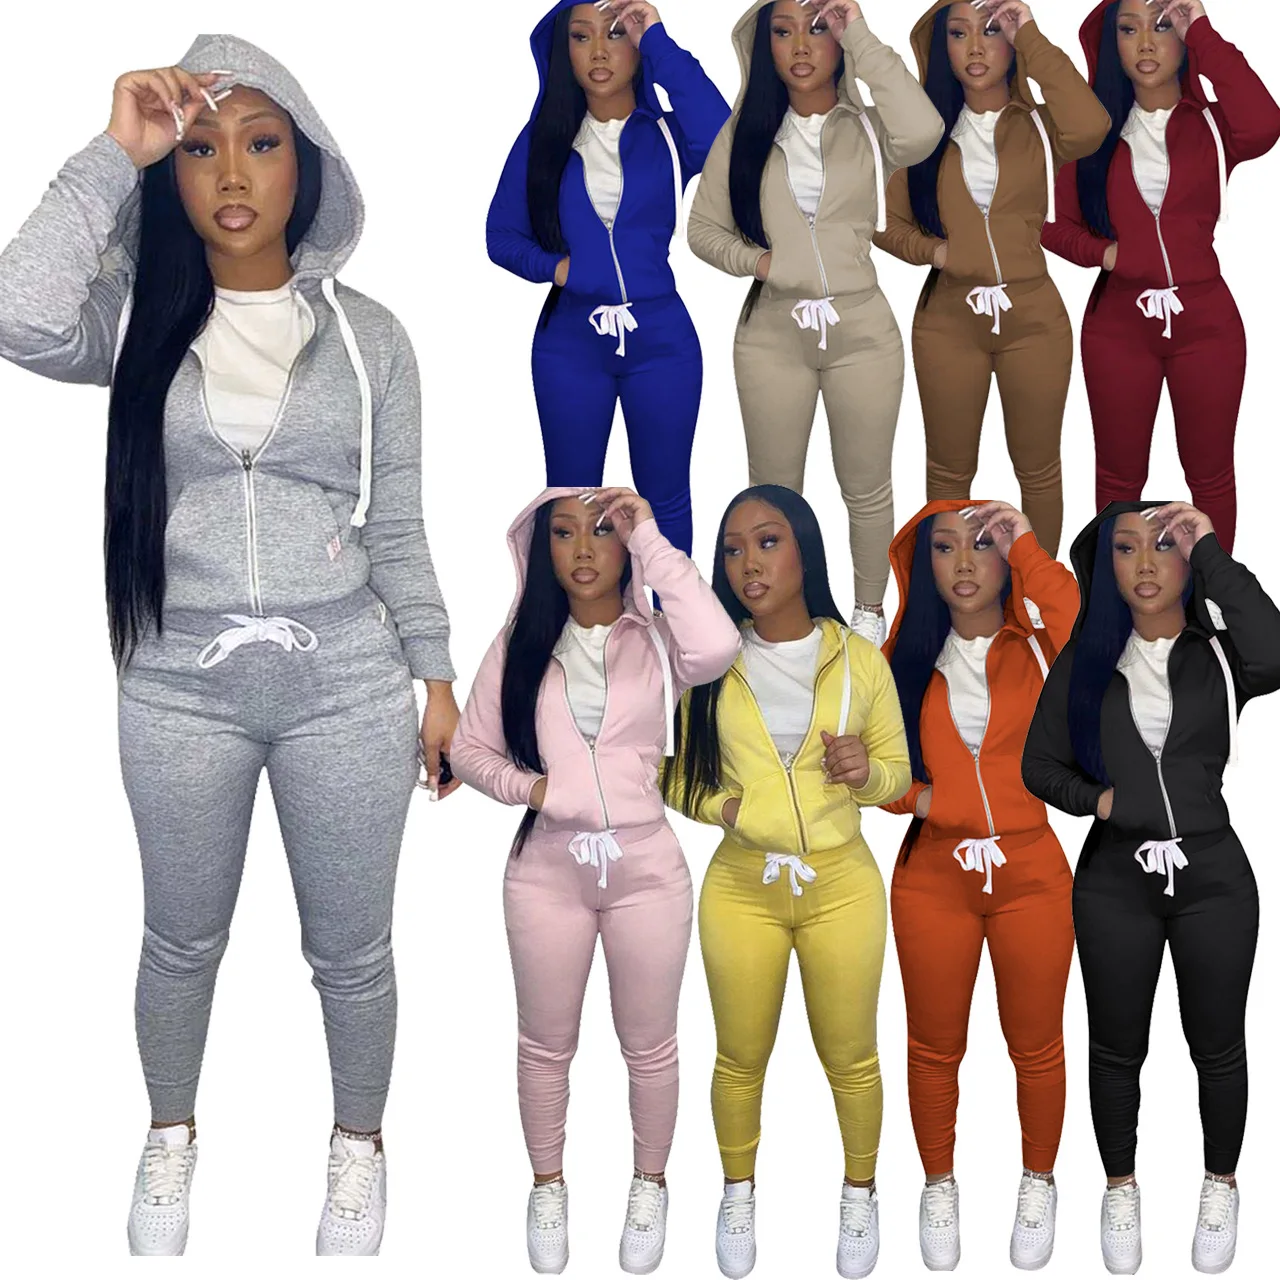 

winter clothing hoodies cotton jogger outfits 2piece women sets jogging sweat suit two piece sweatpants and hoodie set for woman, Gray,pink,yellow,orange,black,khaki,blue,wine red,brown